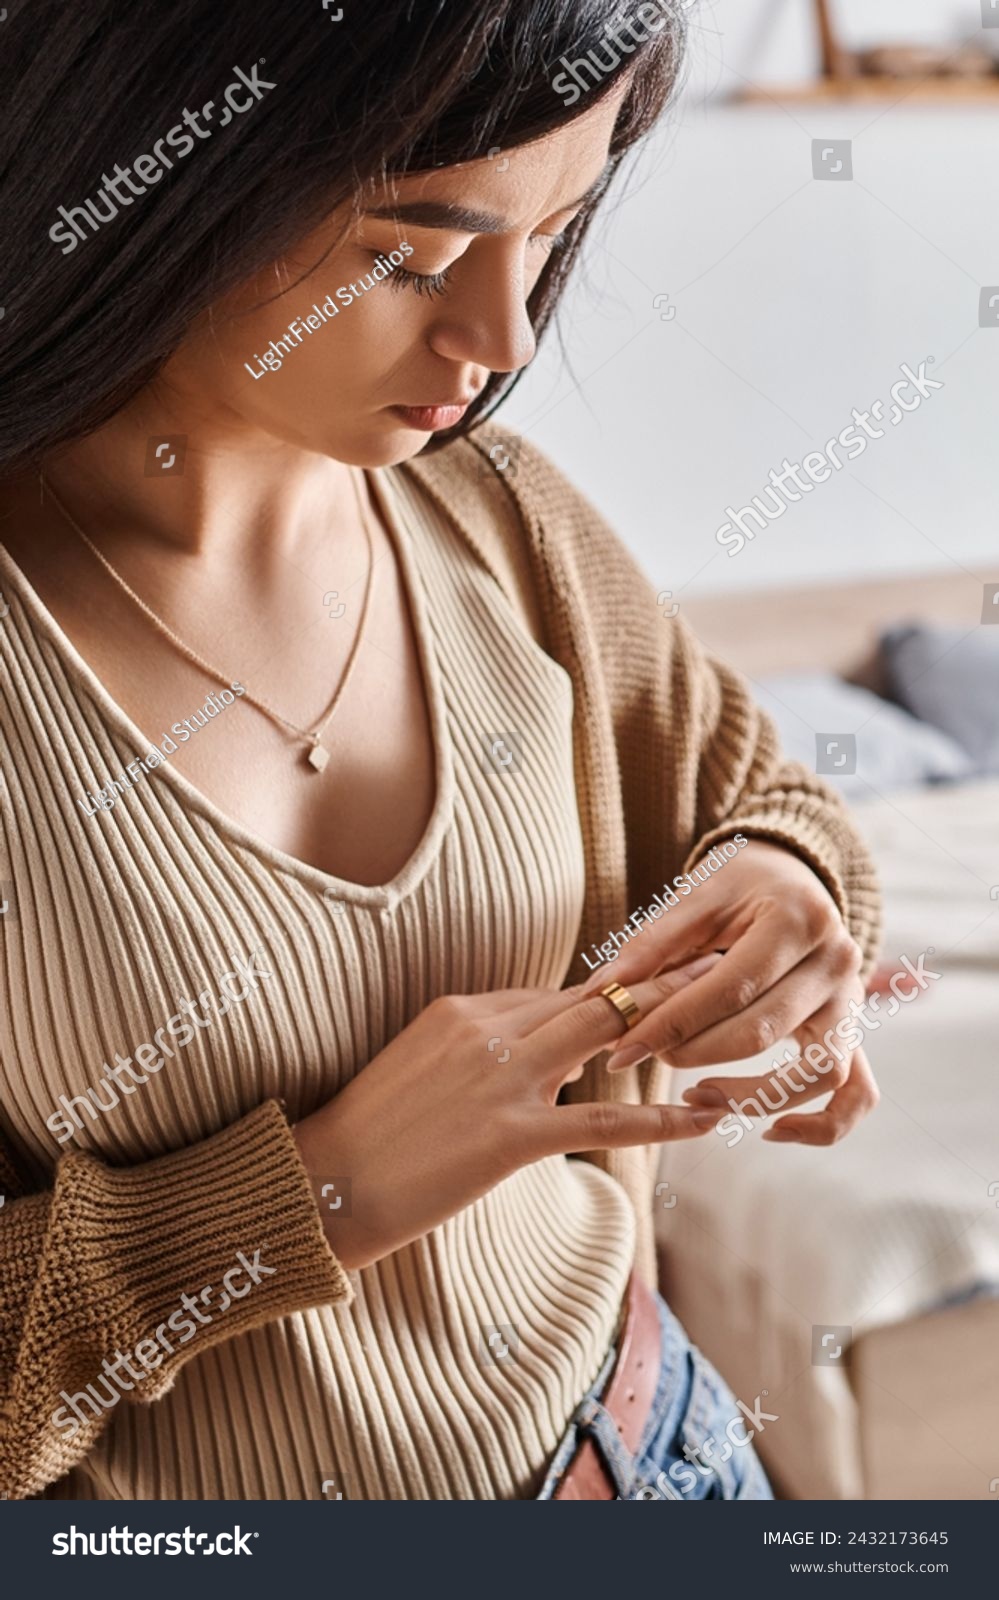 young asian woman taking off wedding ring in sign of divorce, relationship difficulties concept #2432173645